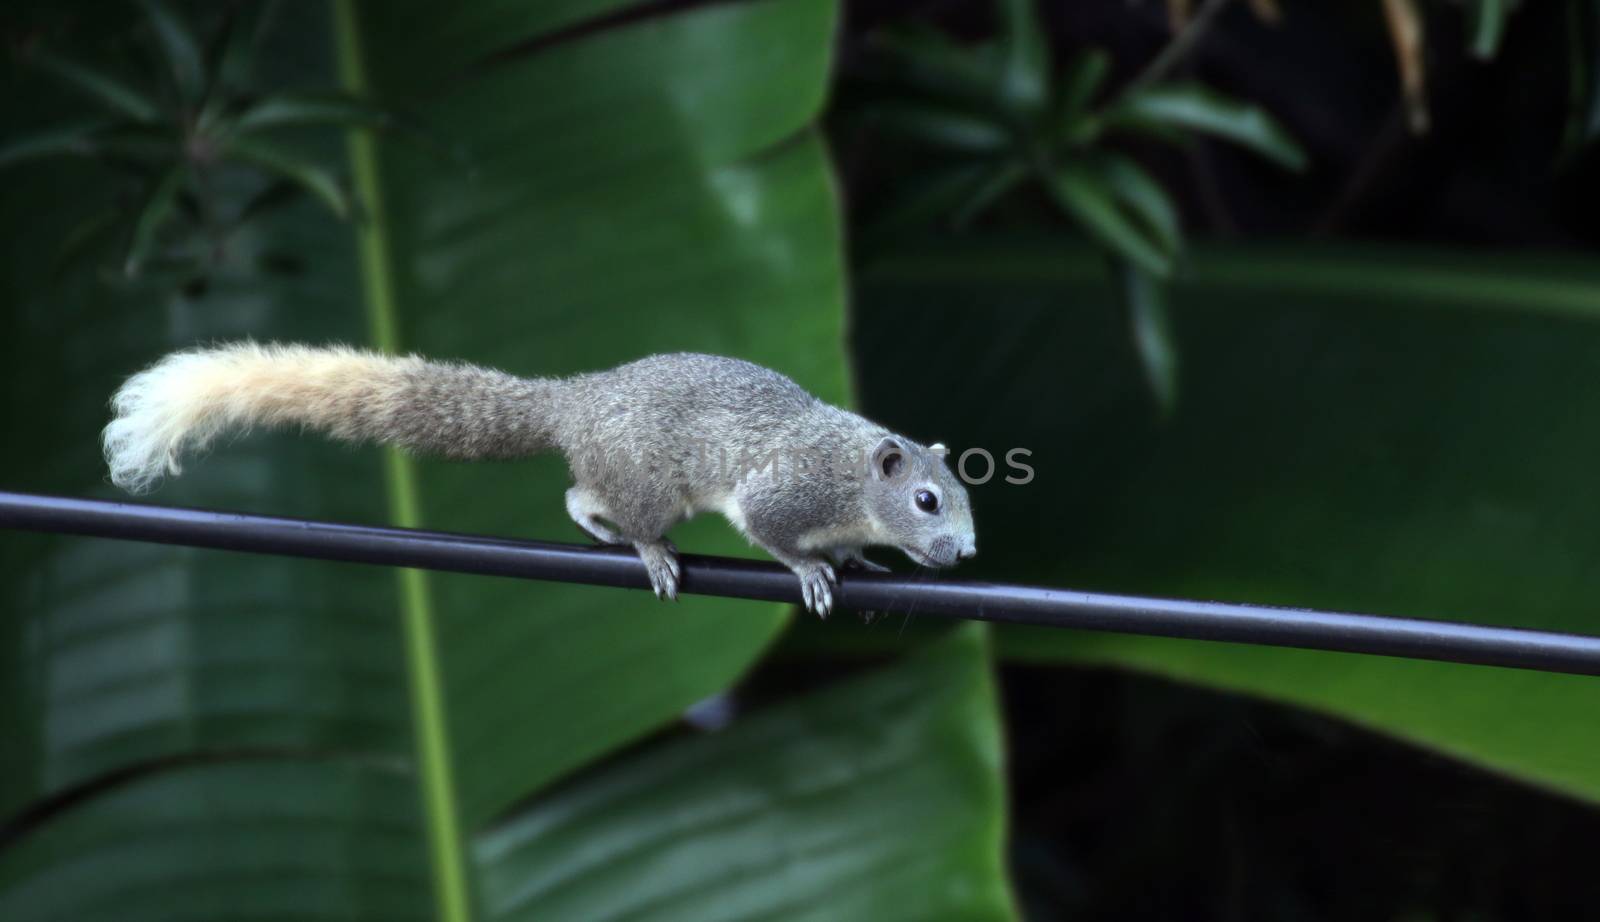 asia squirrel, chipmunk walk or run slow climb power lines in the morning by cgdeaw